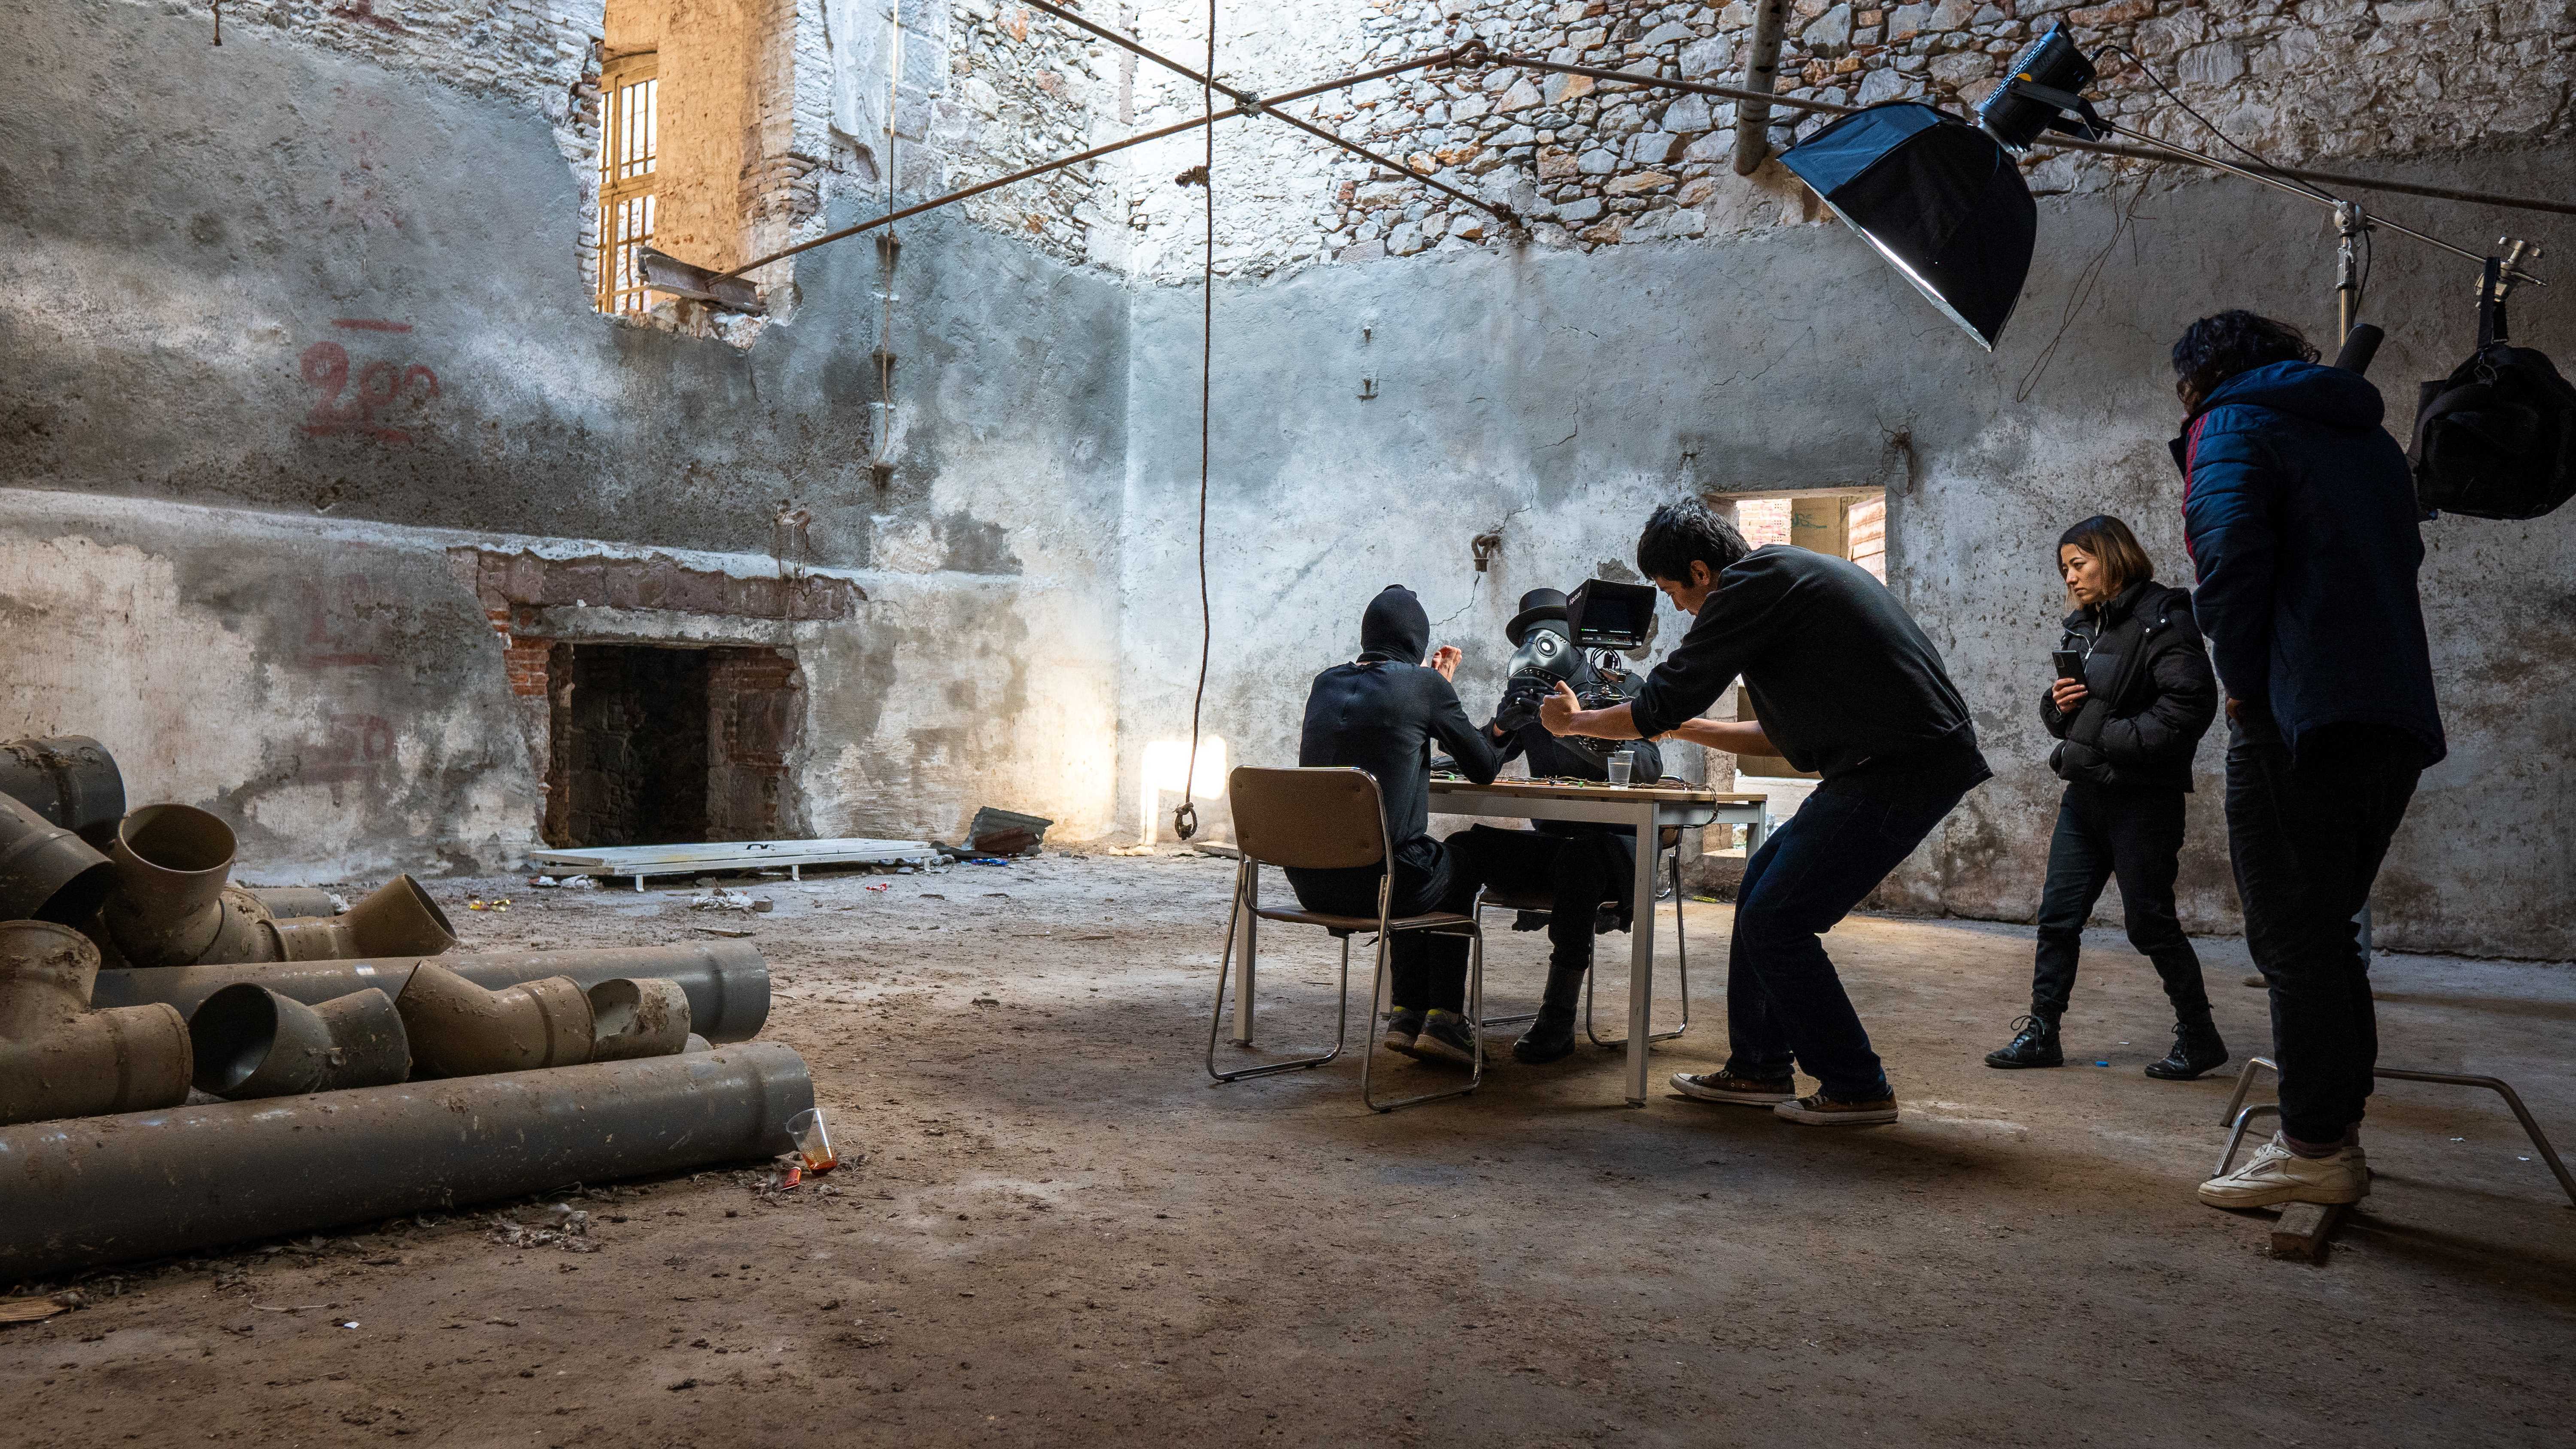 Five persons in a room are making a movie. Two are sitting at a table in a shabby and cold room and the others are filming them.